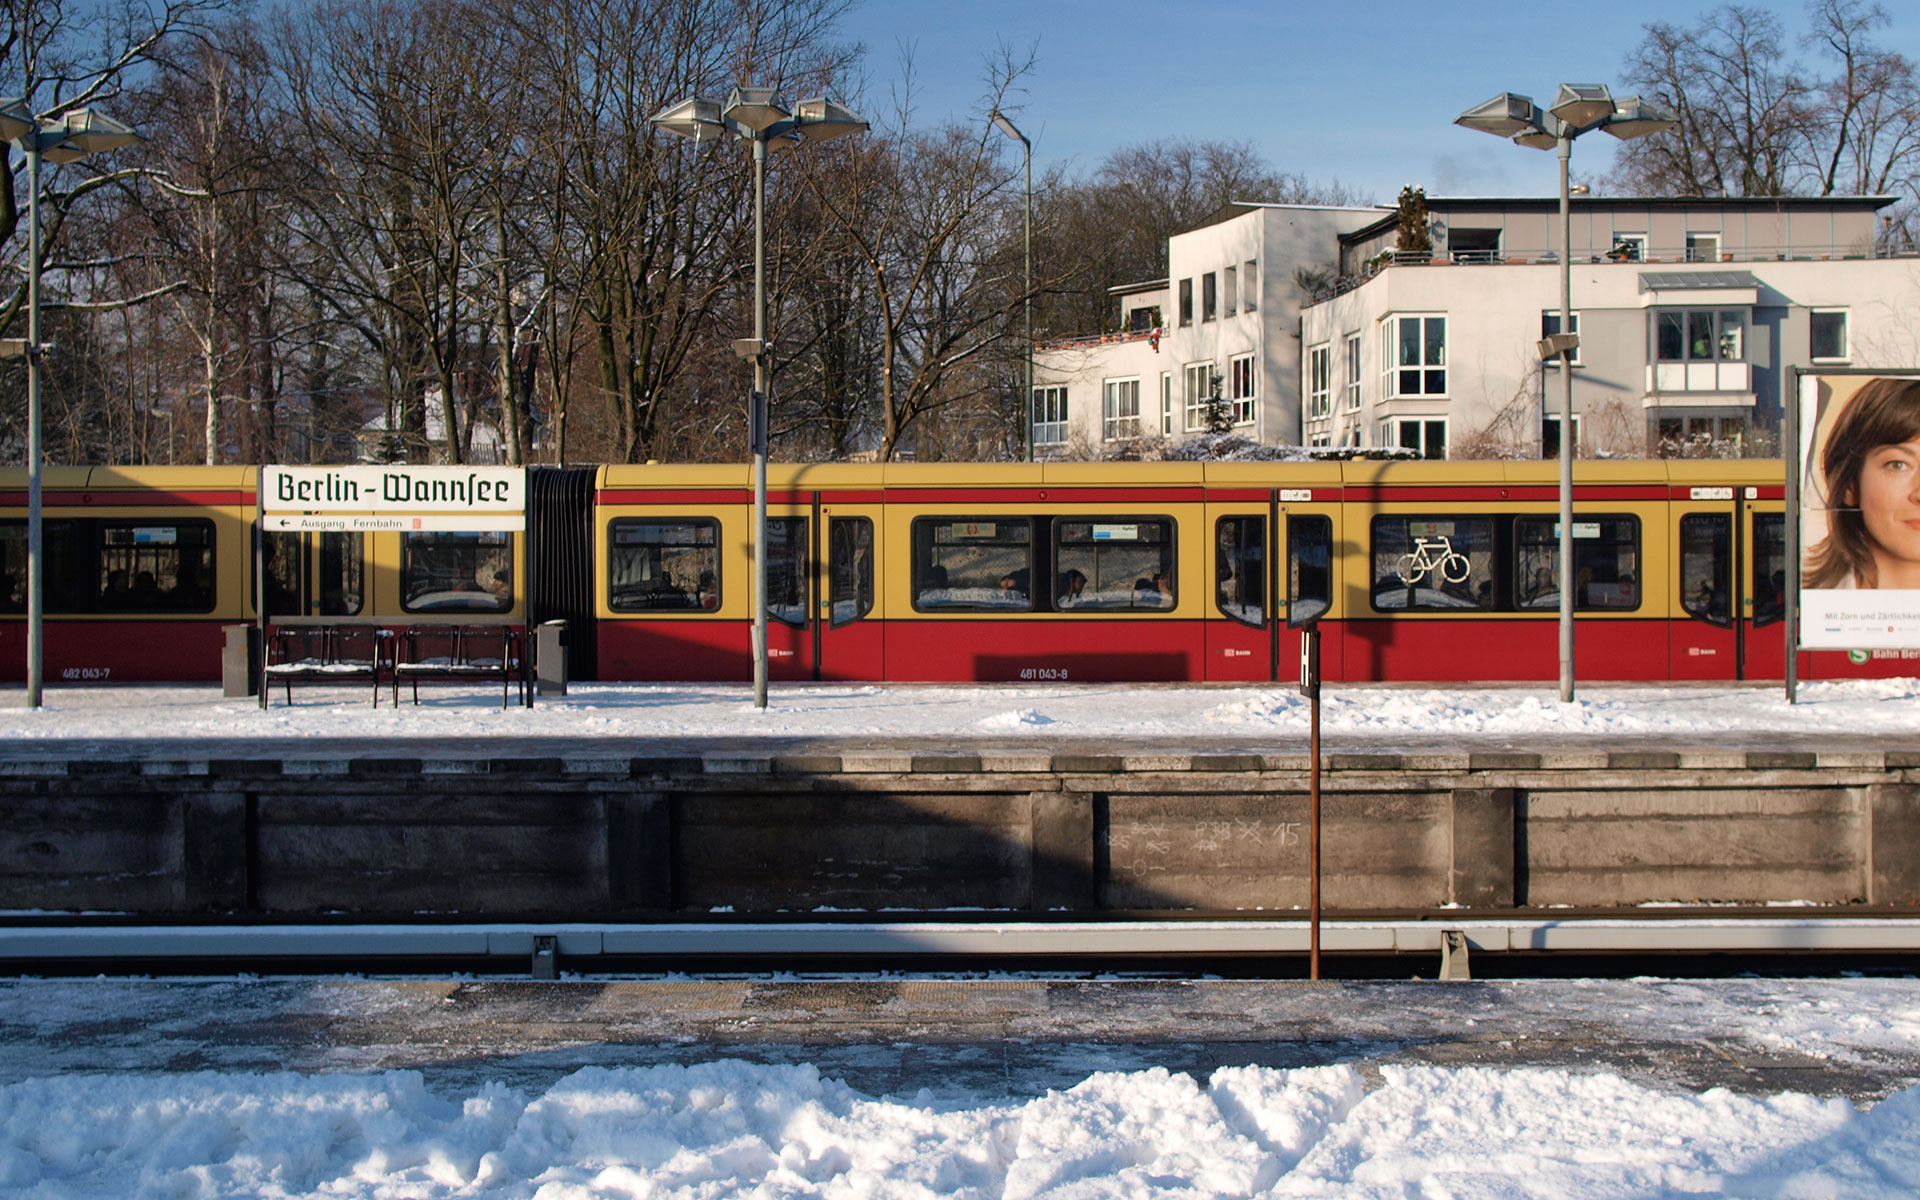 Heading out to the edges of Berlin: an S-Bahn train arriving at Wannsee station in the city's leafy south-western suburbs (photo © hidden europe).